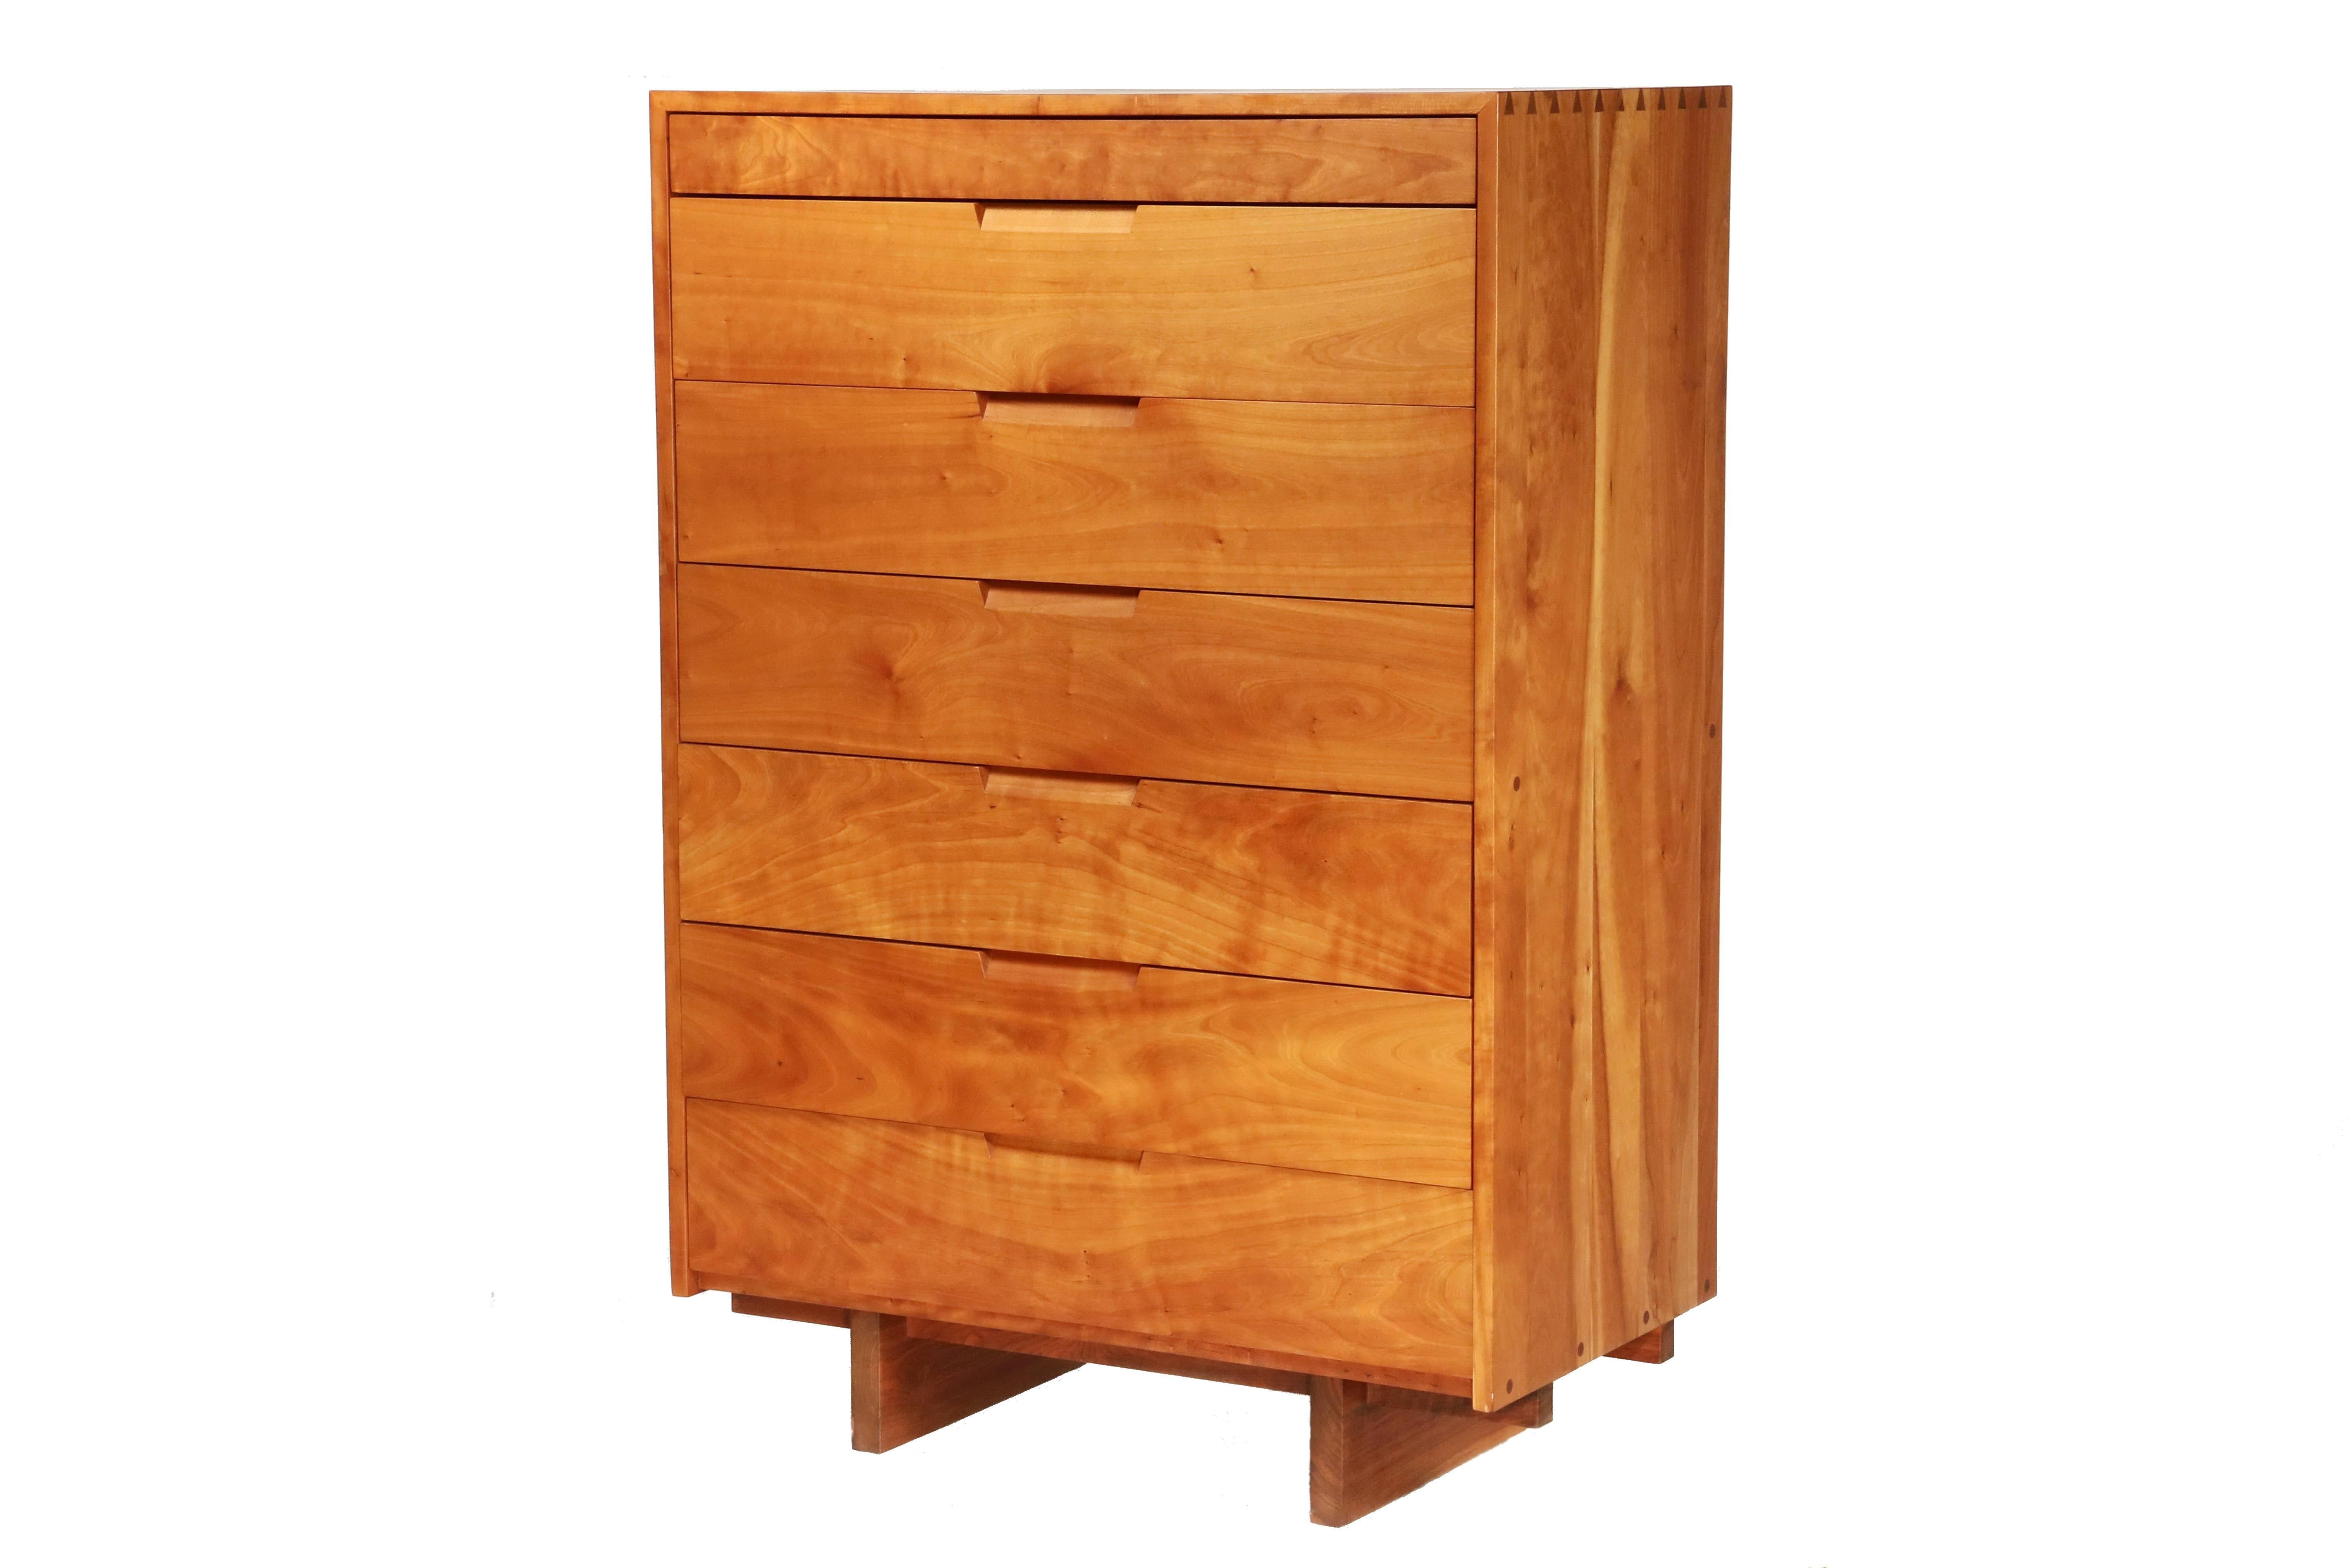 Hand-Crafted Tall Cherry Chest by George Nakashima For Sale